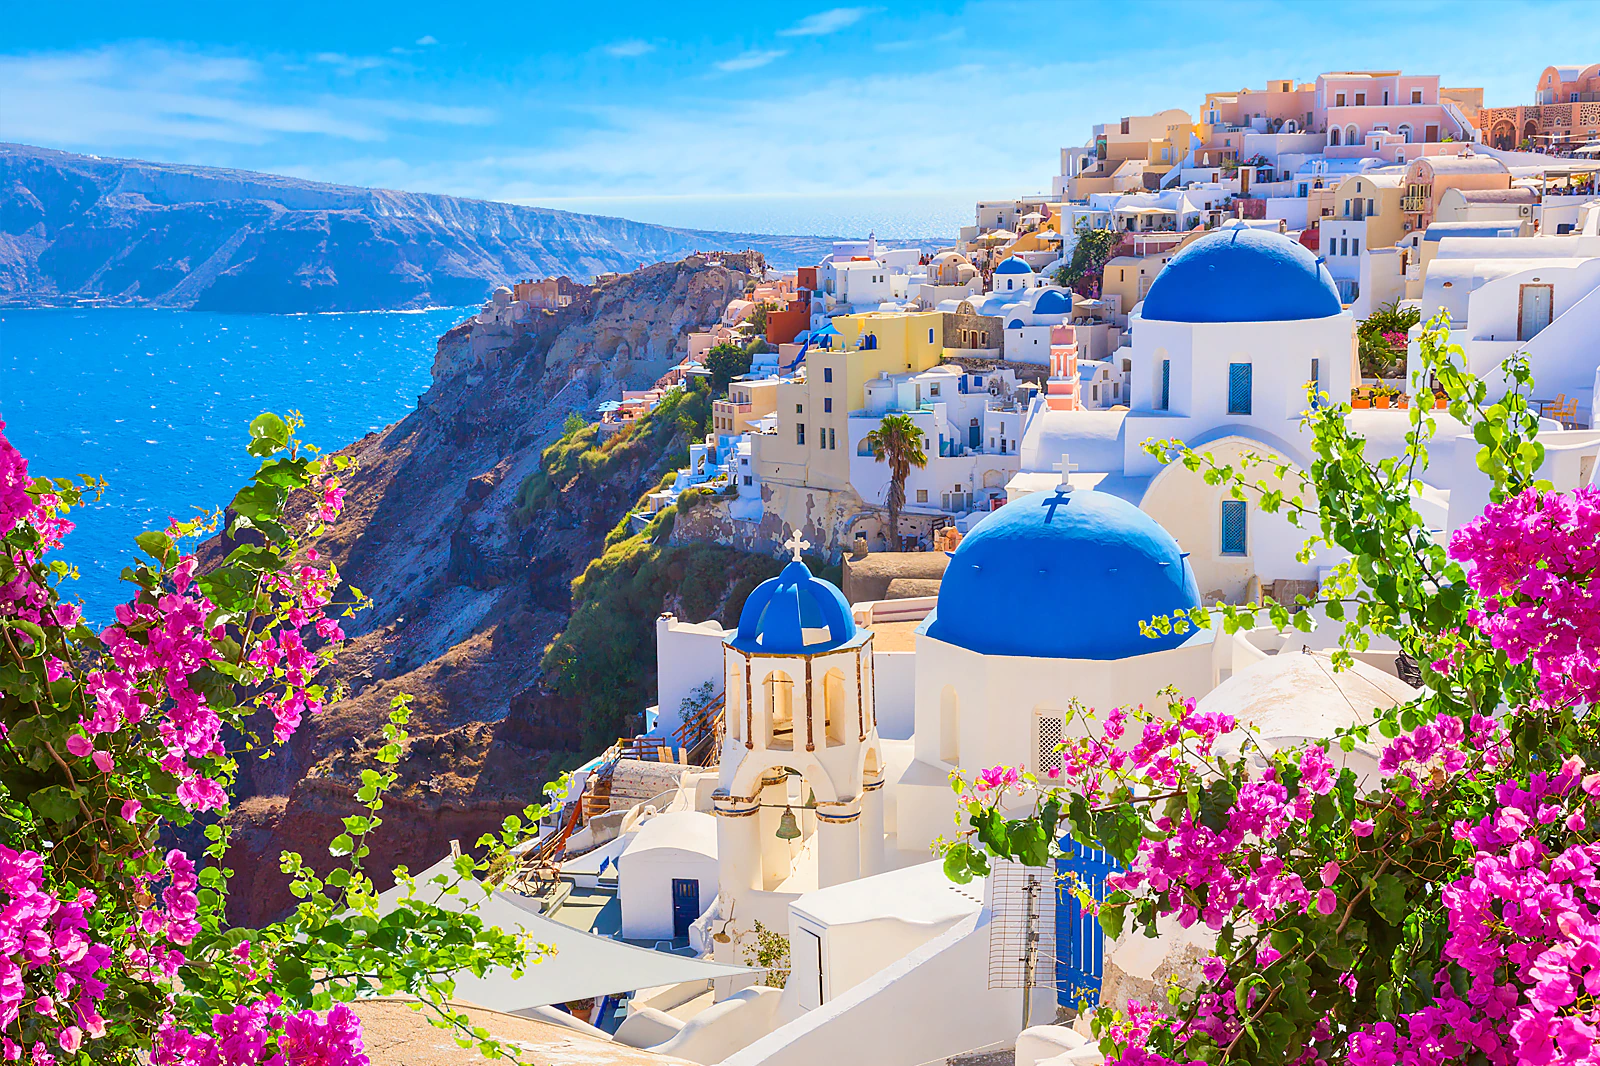 With its stunning sunsets, whitewashed buildings, and crystal-clear waters, Santorini continues to enchant travelers with its timeless beauty. Explore charming villages perched on cliffs, relax on black sand beaches, and savor delicious Mediterranean cuisine against the backdrop of the Aegean Sea.]]>